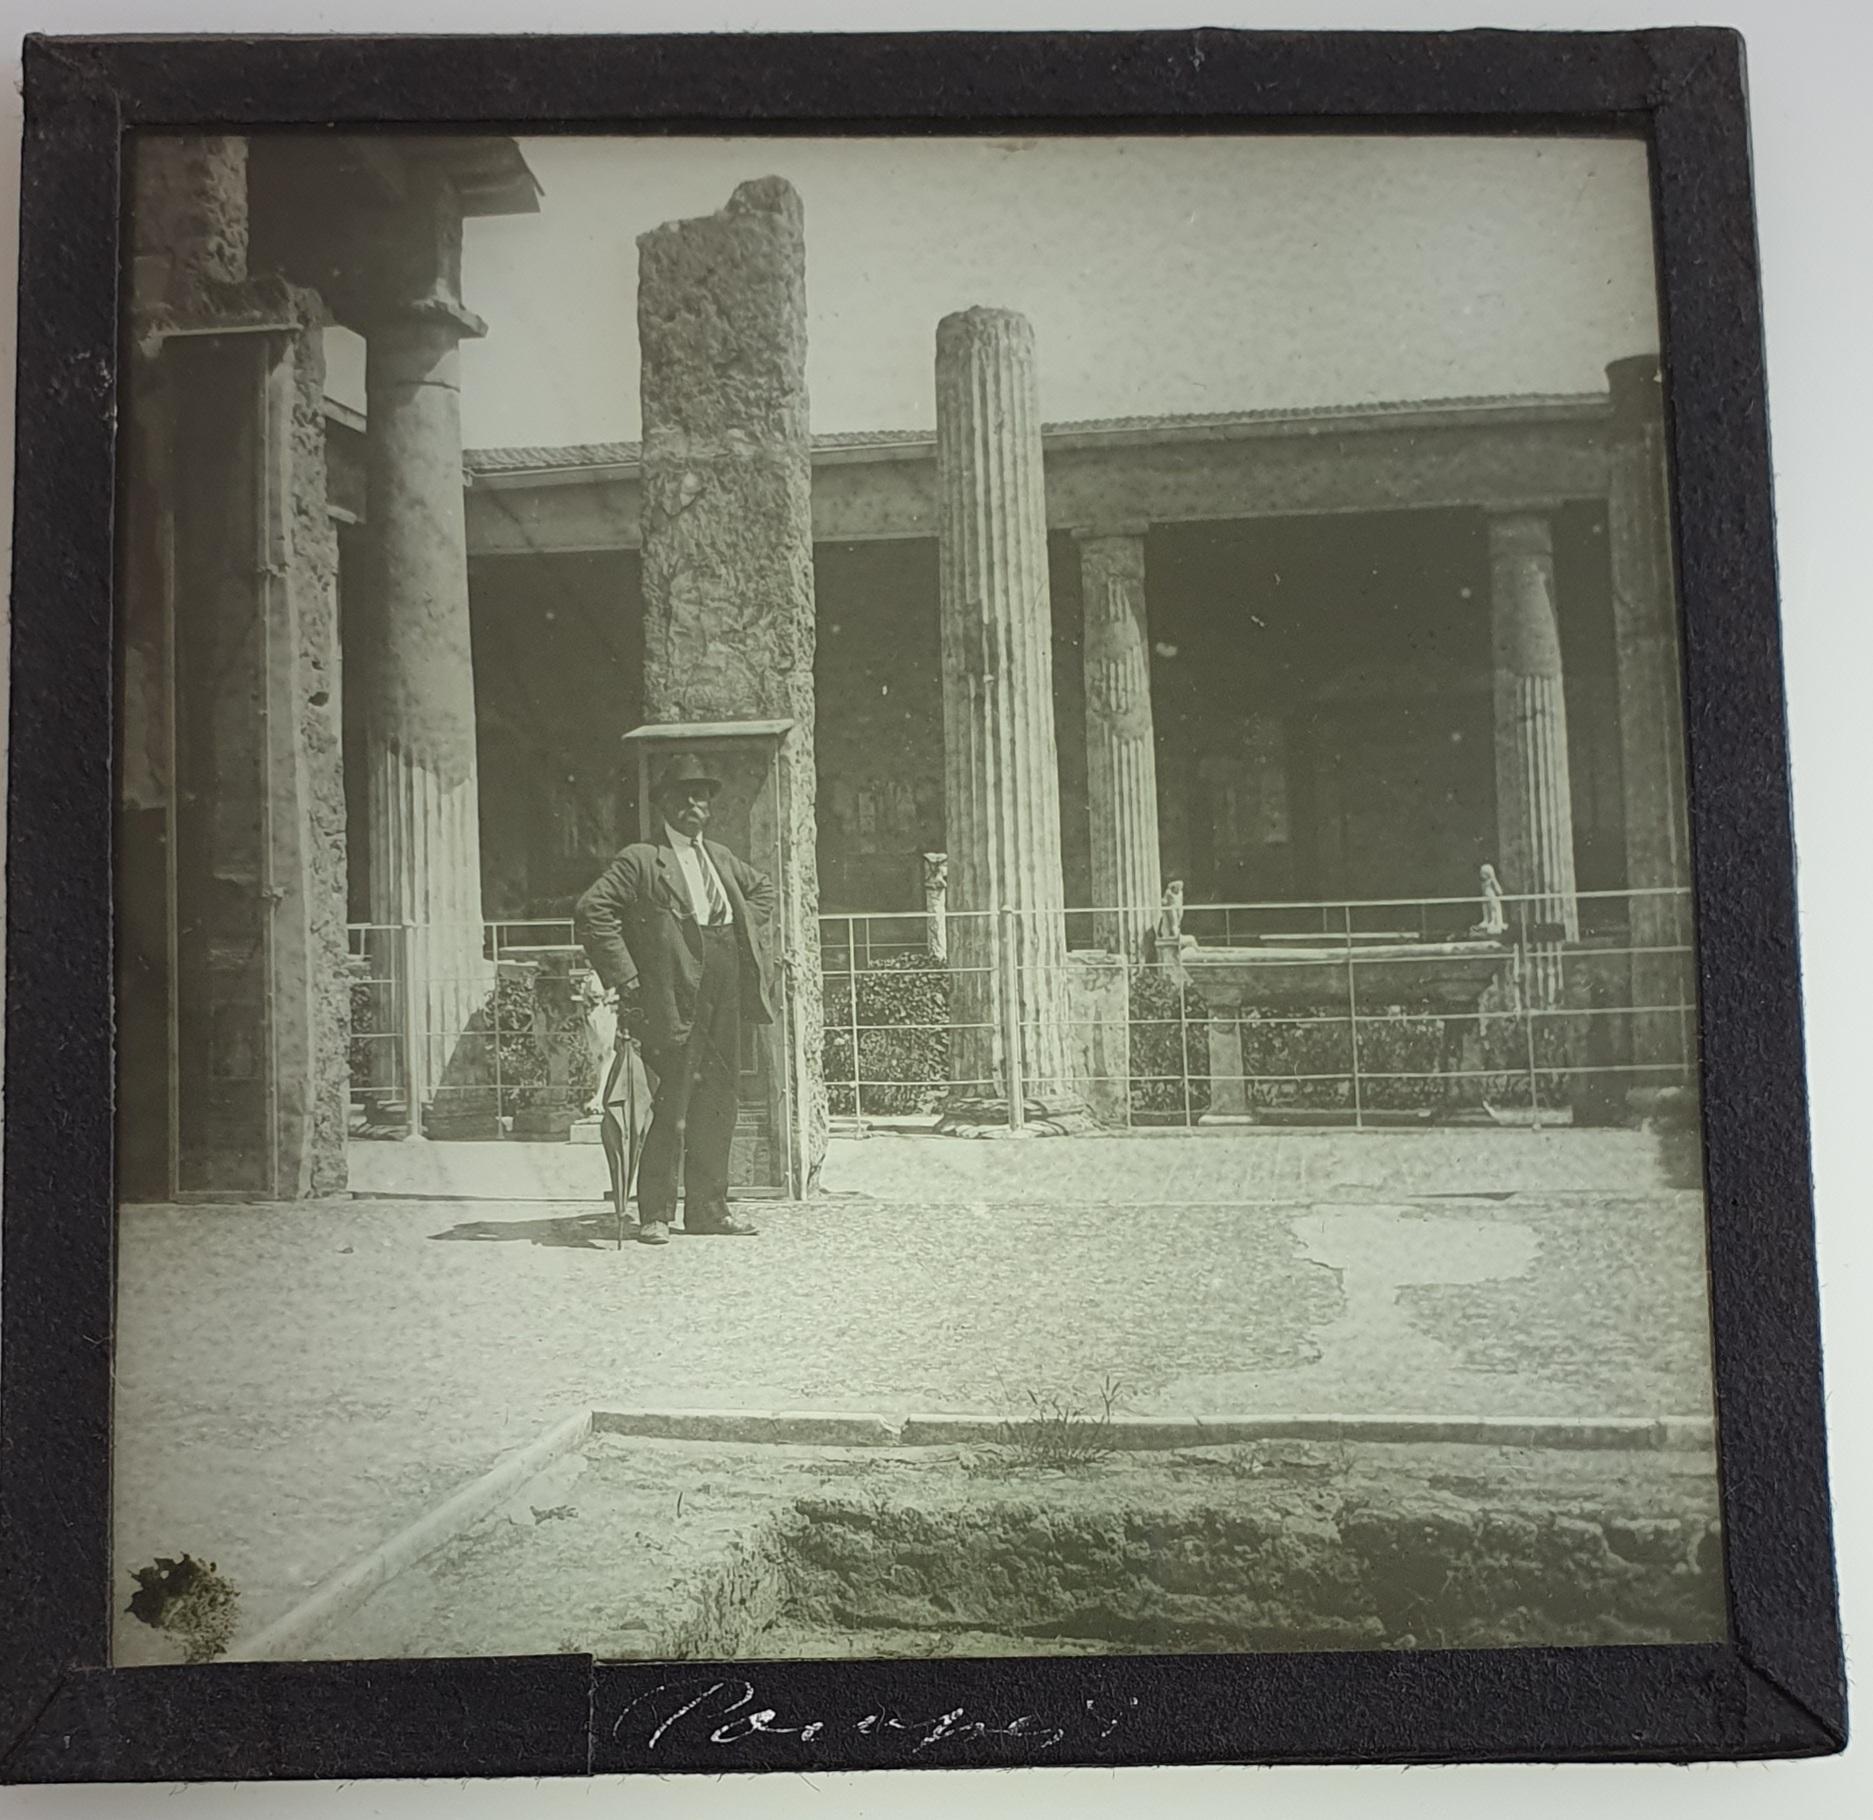 20 Antique glass lantern slides with motifs of Italy.

1. Pompeii, man standing in front of columns 
2. Venice, St. Salute
3. Rome, Castle Sant'Angelo
4. Pompeii, Civil forum
5. Isola Bella, Lago Maggiore
6. Milan, Arch of peace. Portraying